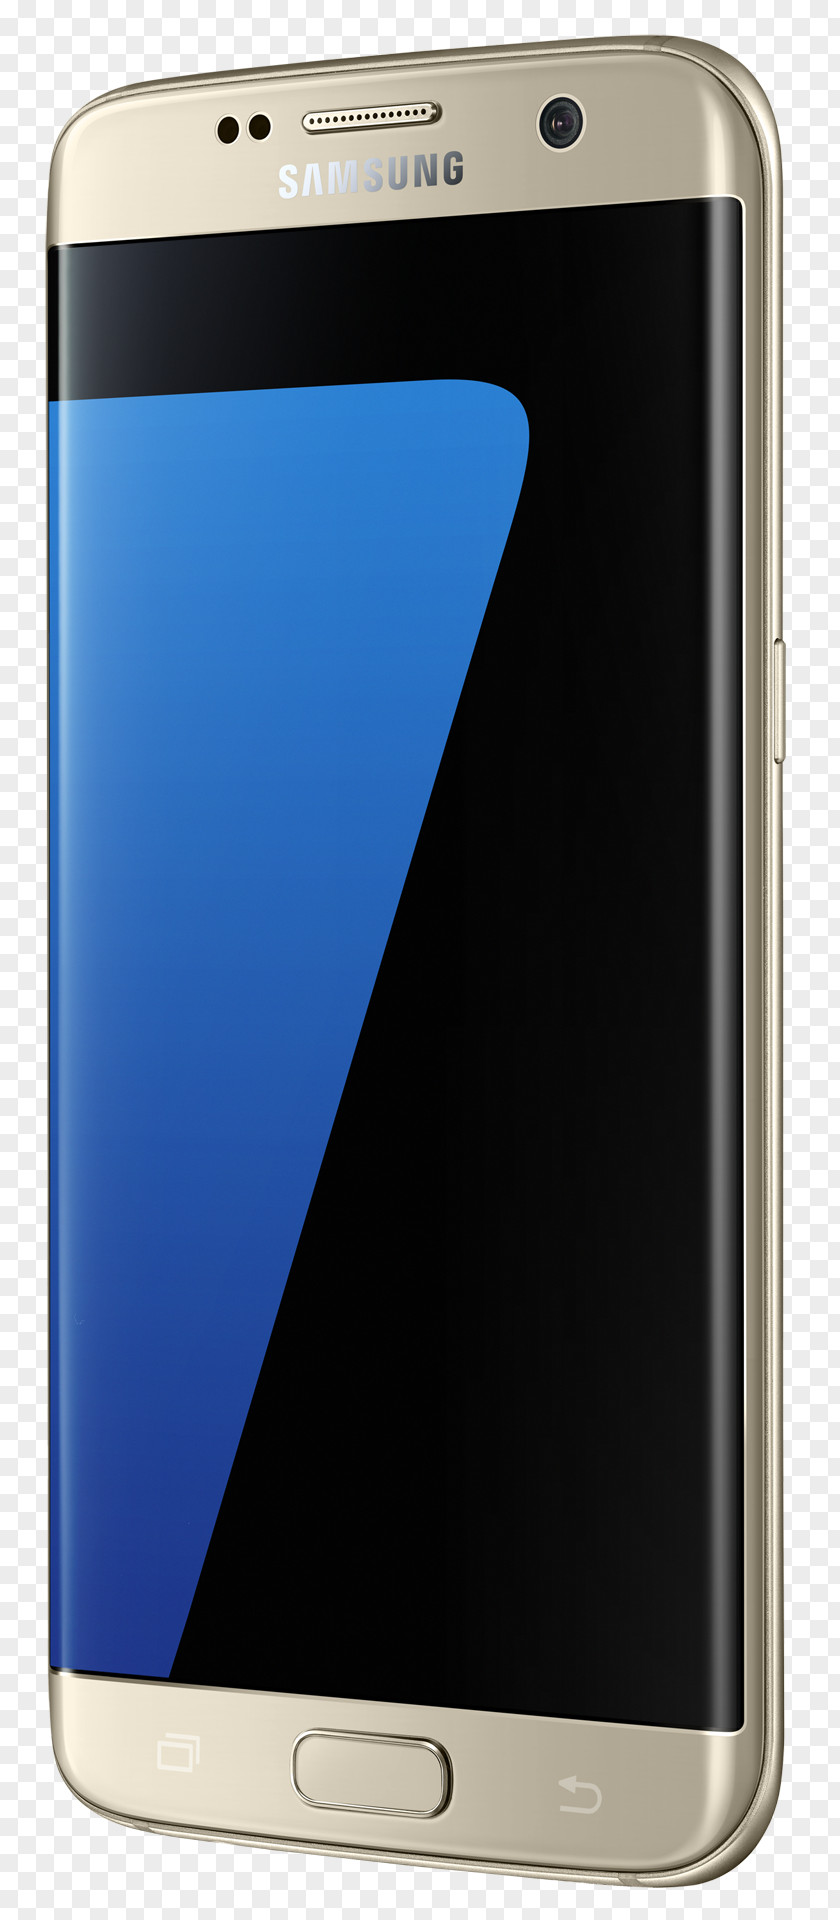 Mobile Shop Samsung GALAXY S7 Edge Smartphone 4G PNG